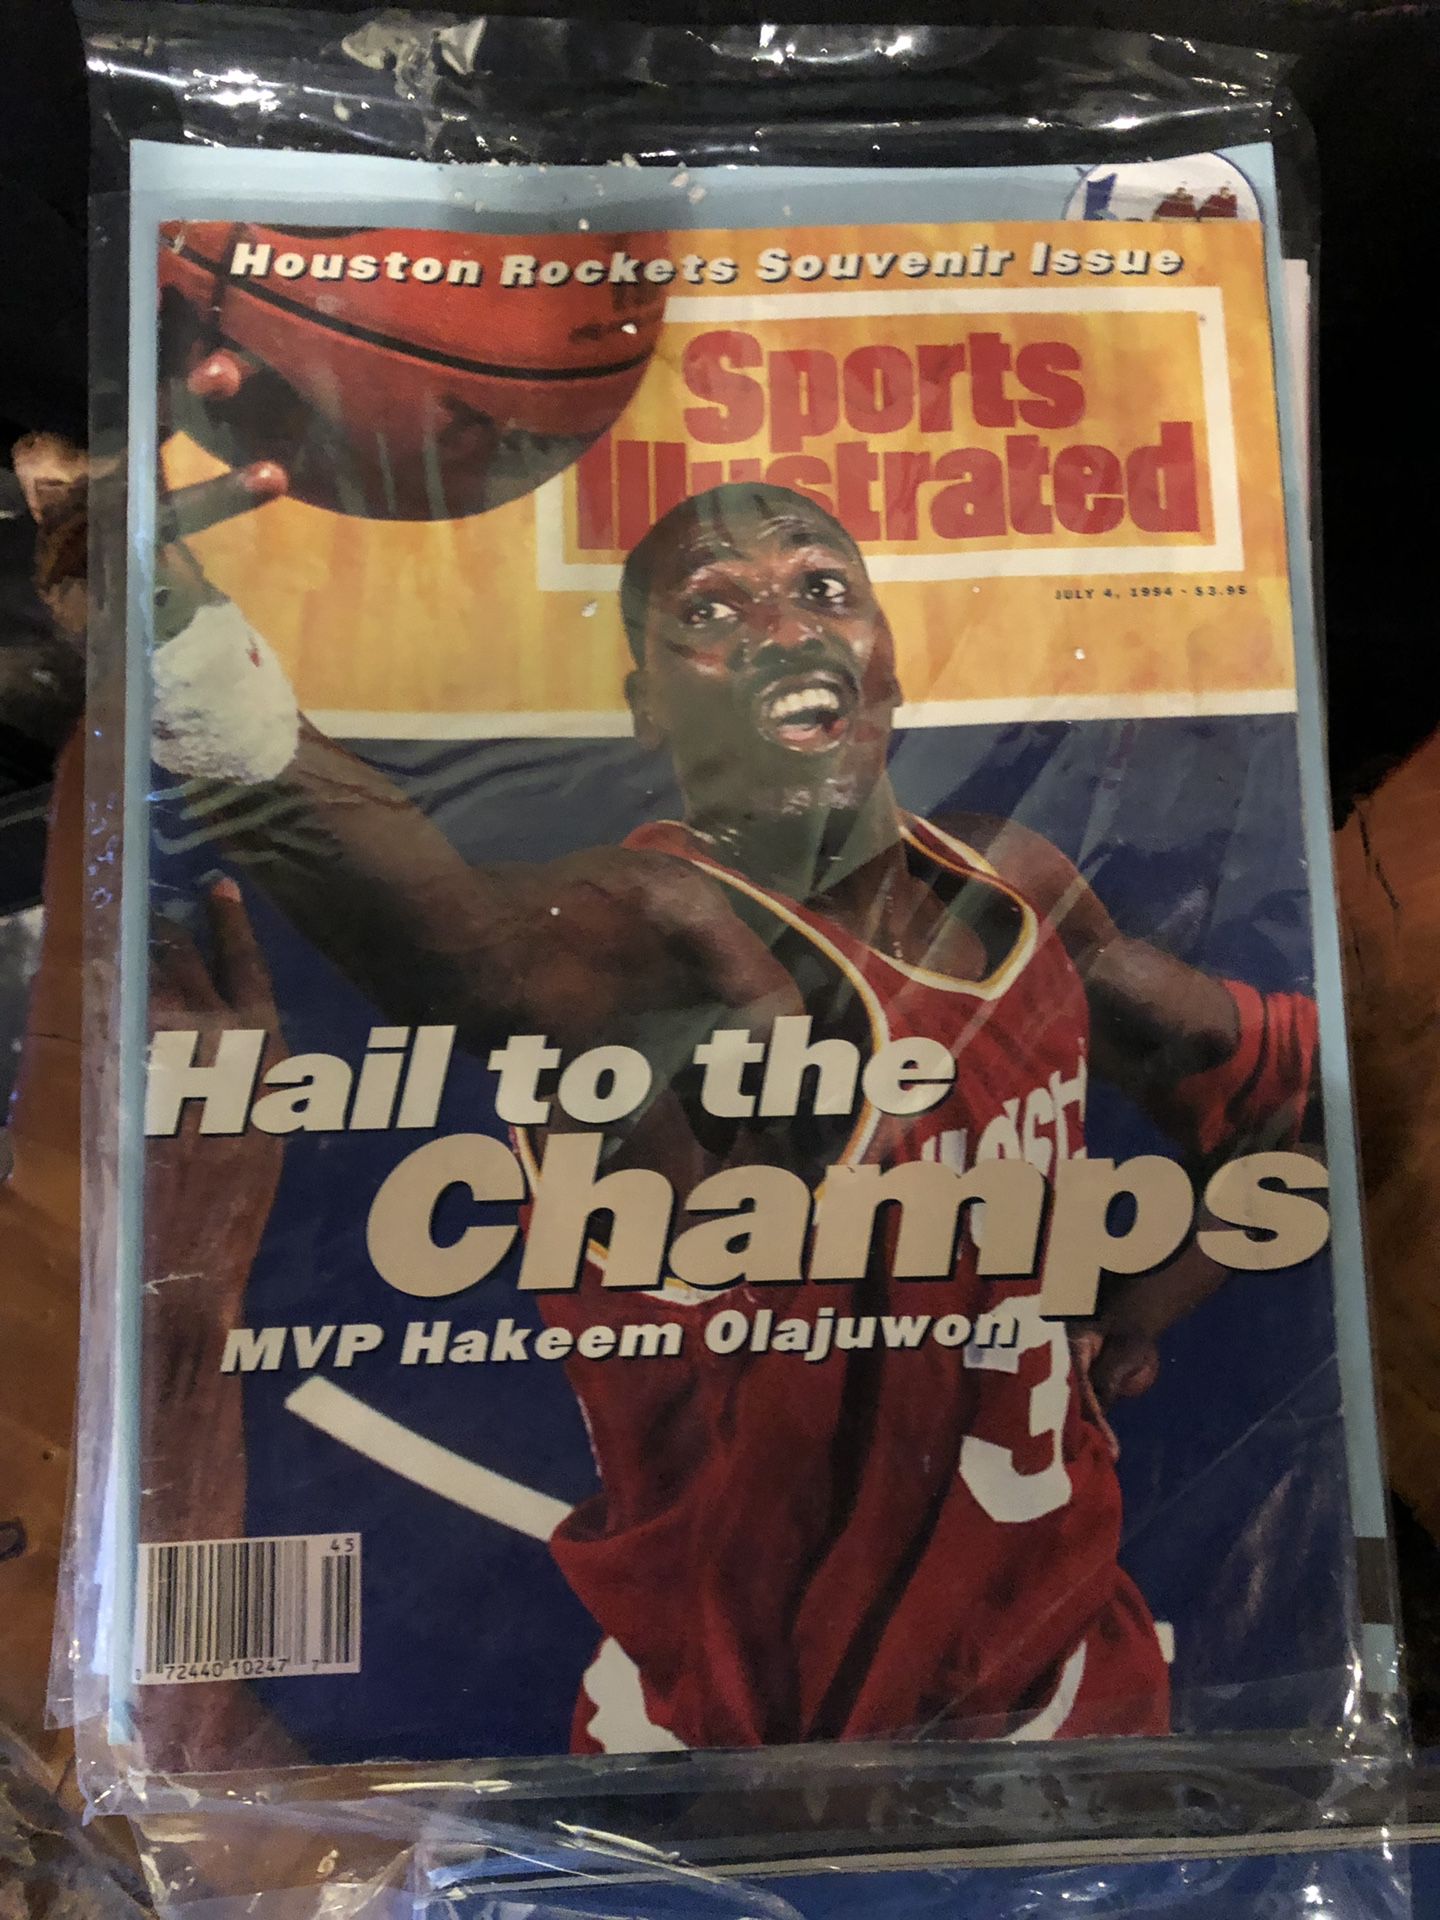 Magazine collectible sports editions, Sports Illustrated and other vintage Magazines